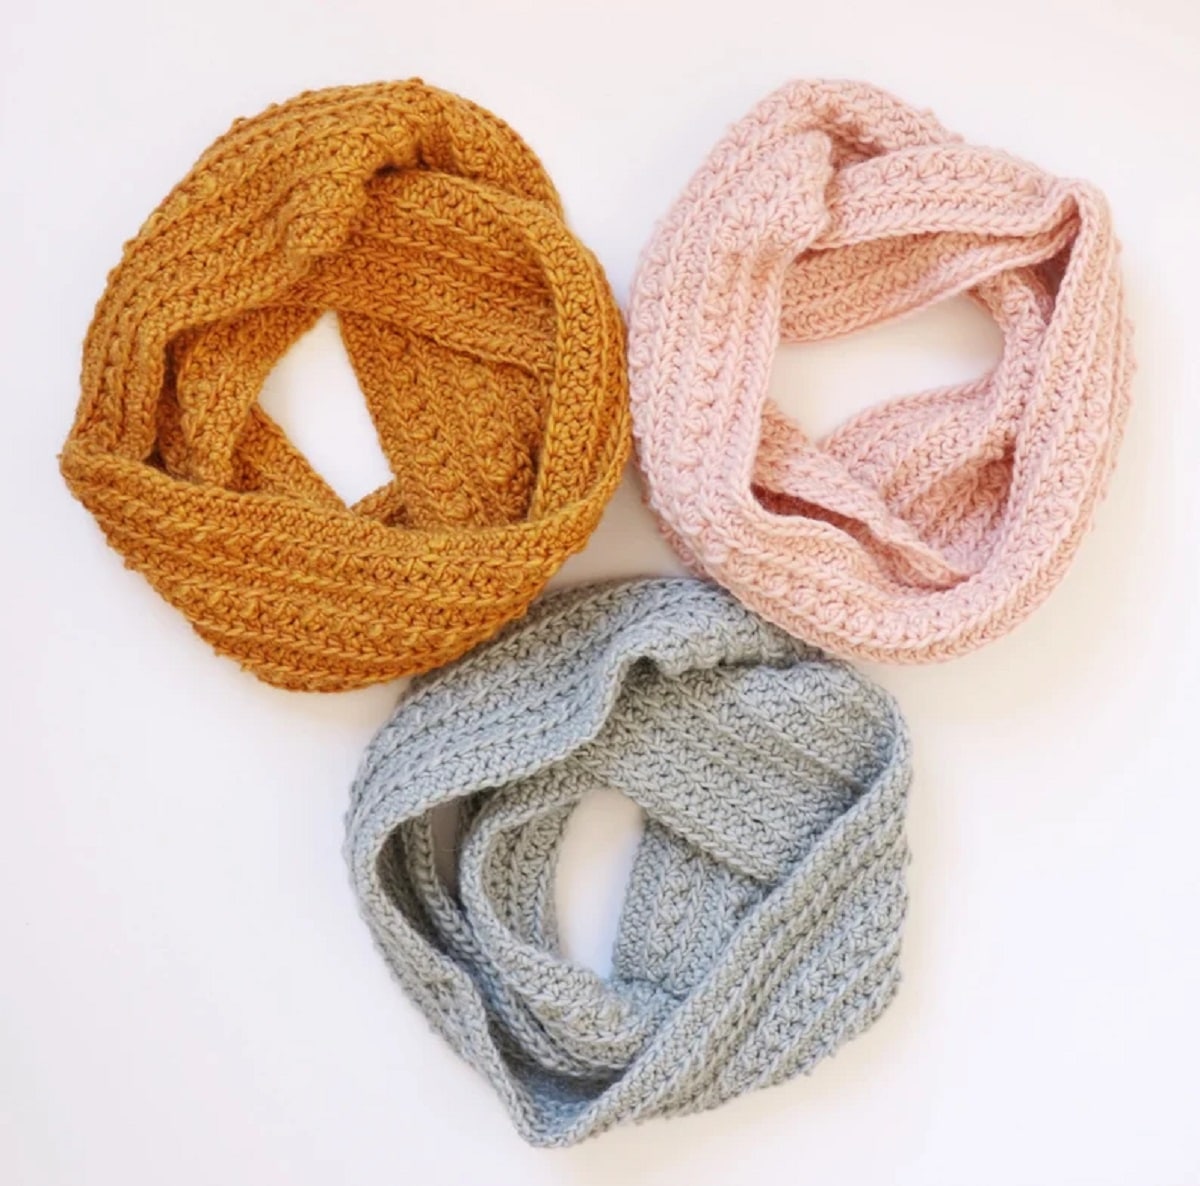 Mustard yellow light pink, and blue crochet cluster stitch infinity scarves in three circles on a white background.